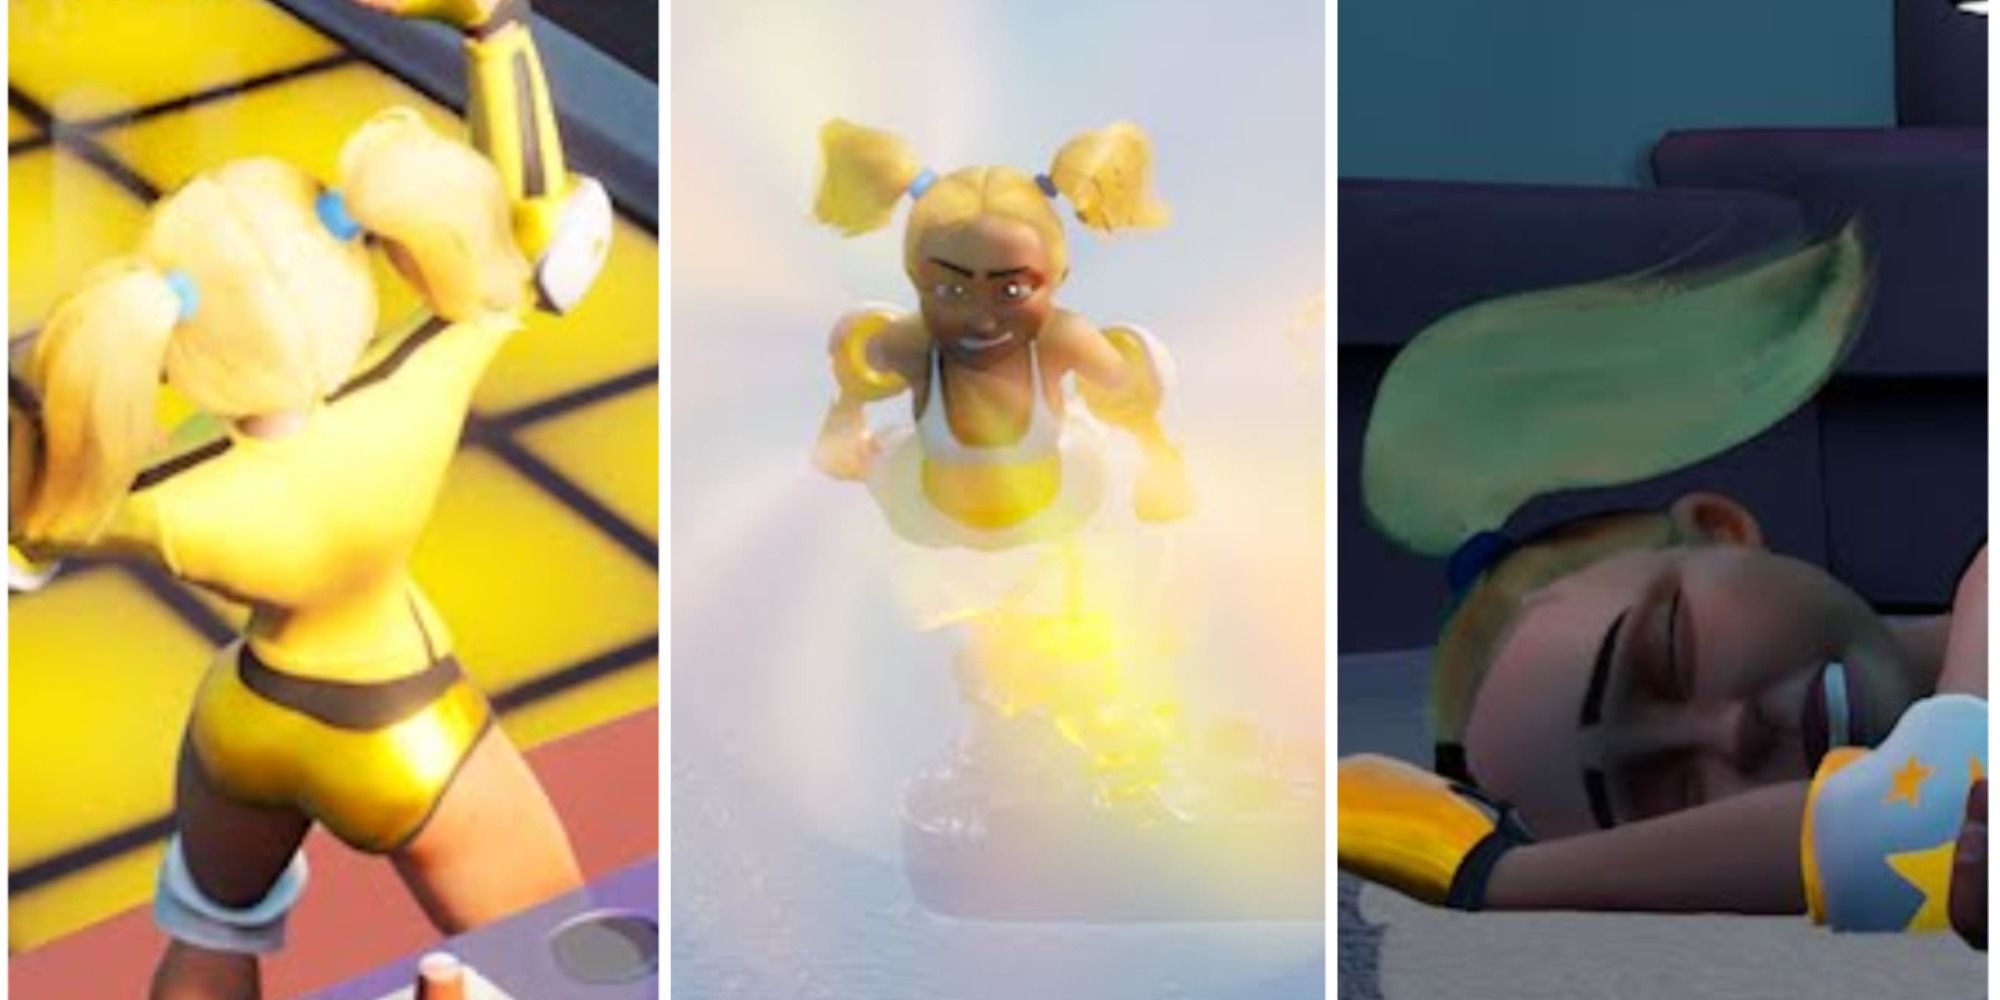 Three images of wrestler characters: one celebrating, one flying through the air and one ko'ed